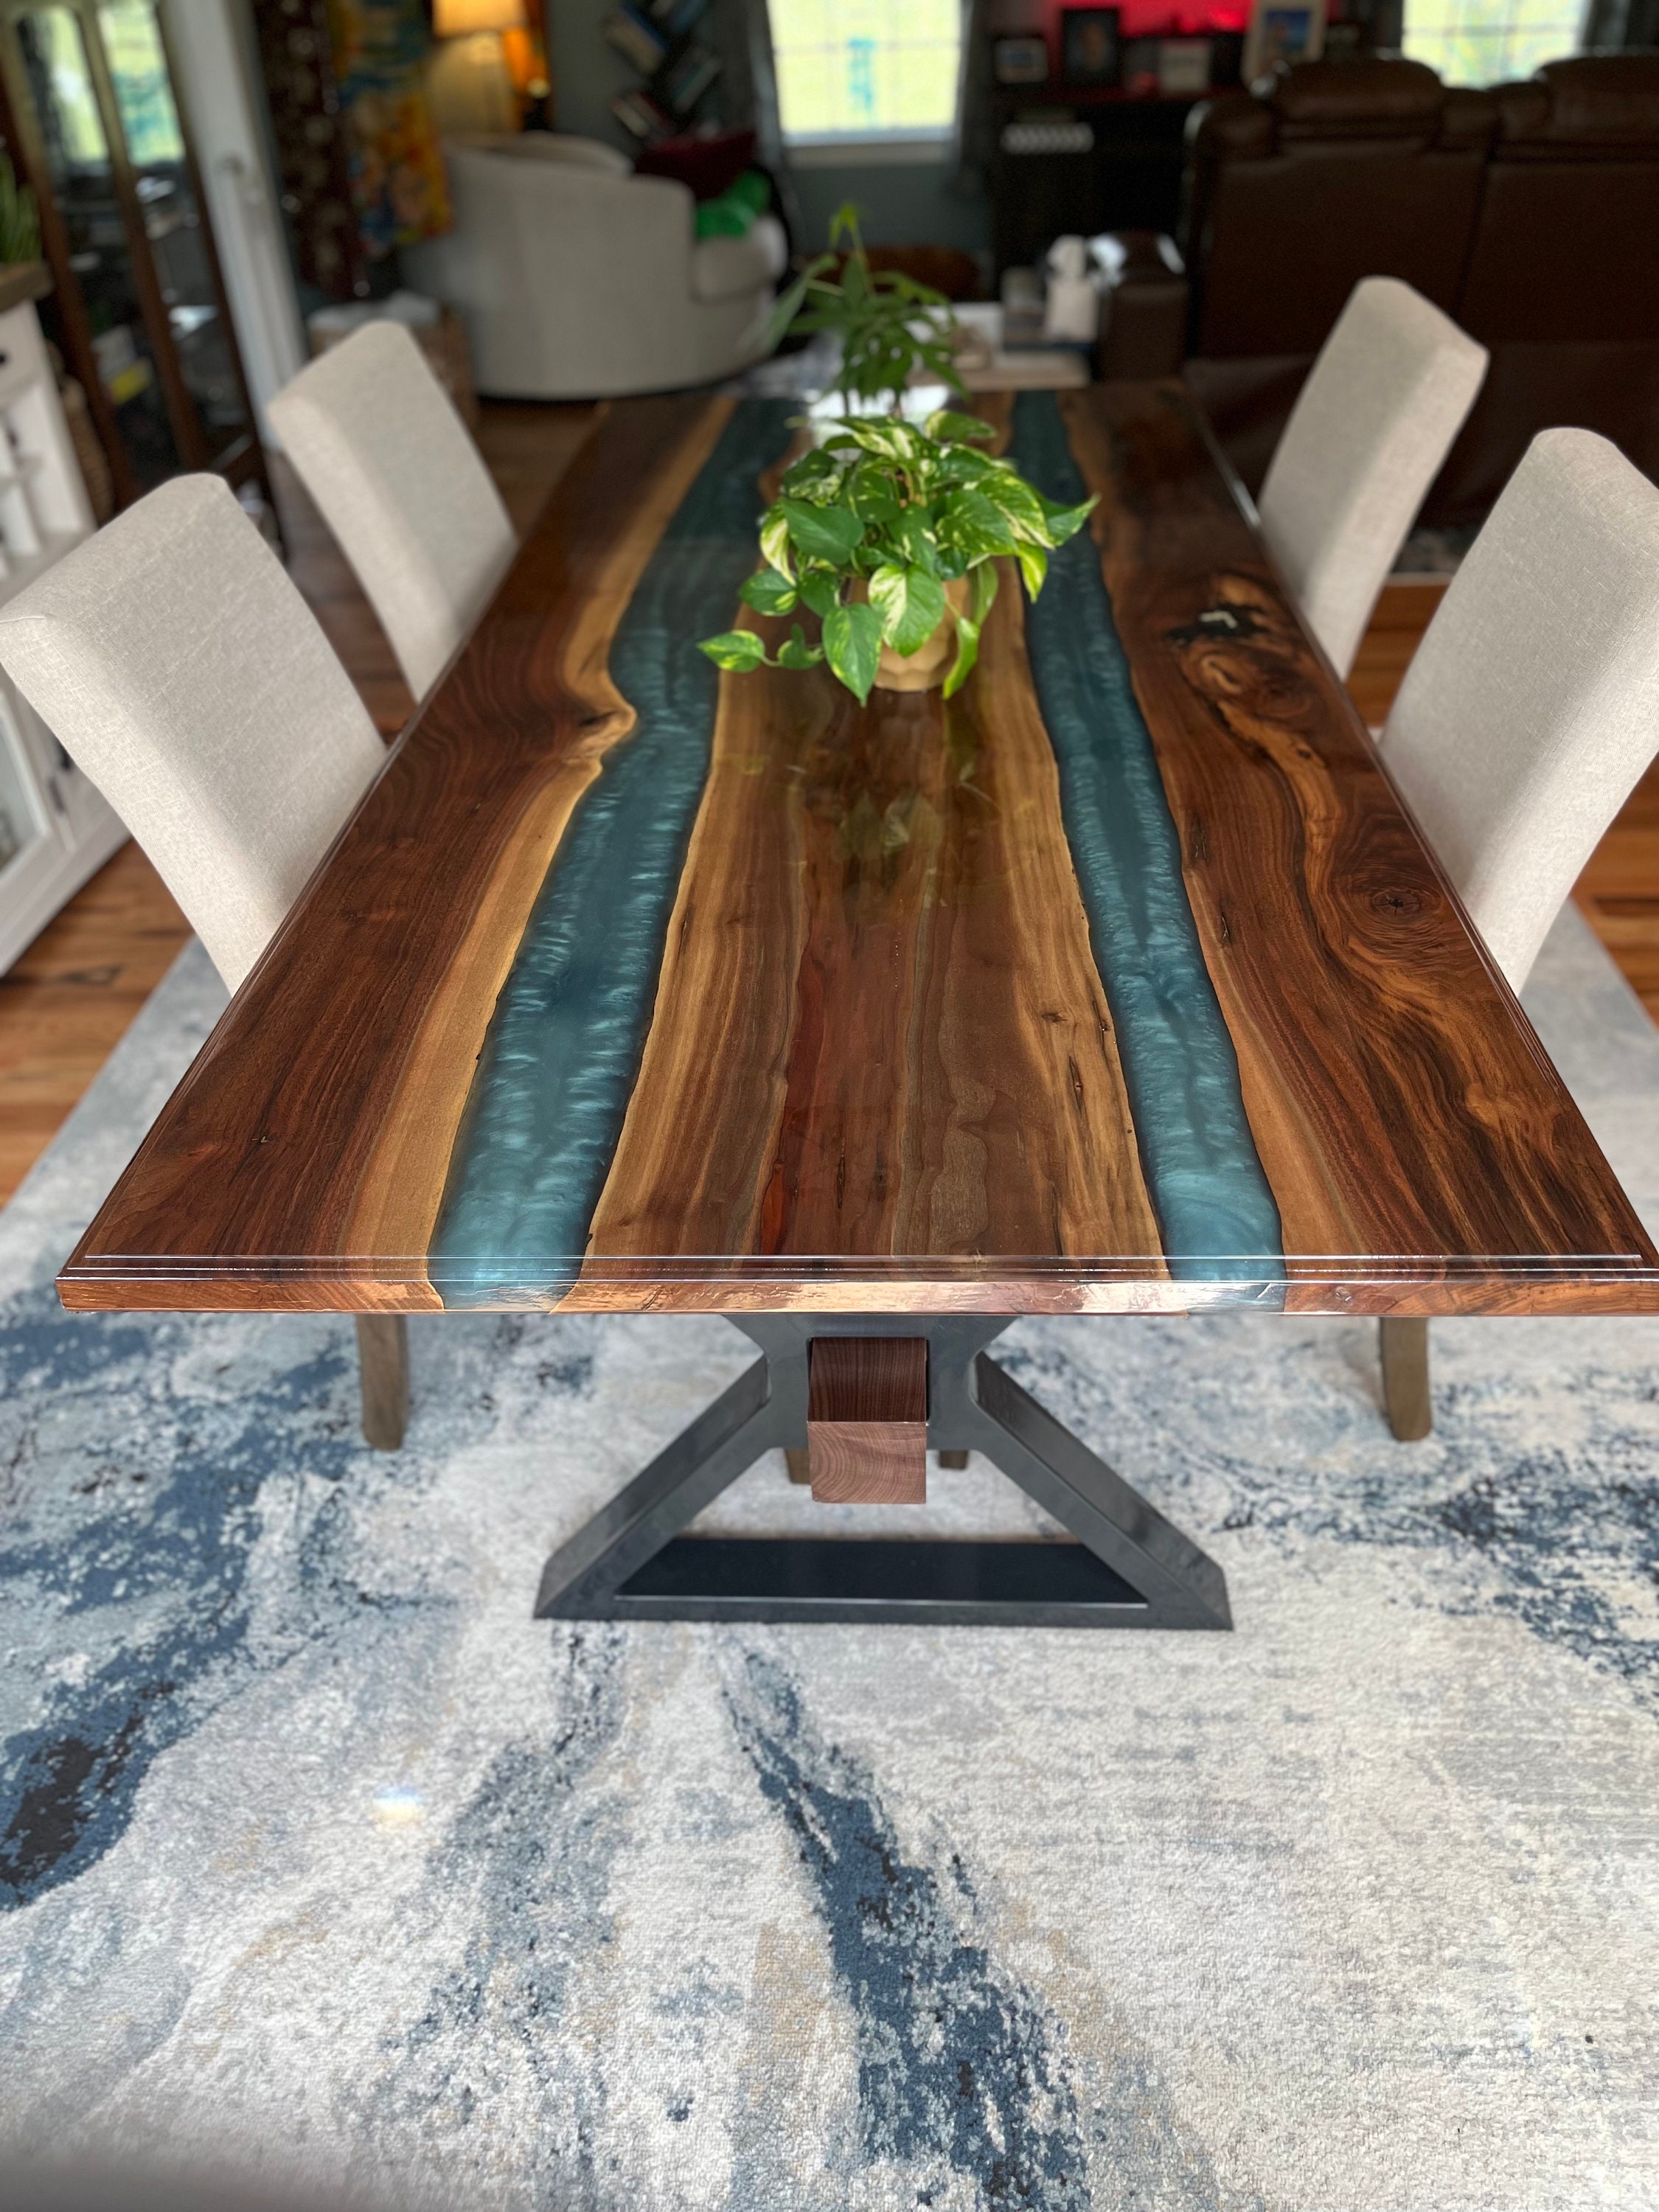 96 x 48 Epoxy Resin Table Top Stunning Live Edge Design for Dining &  Office